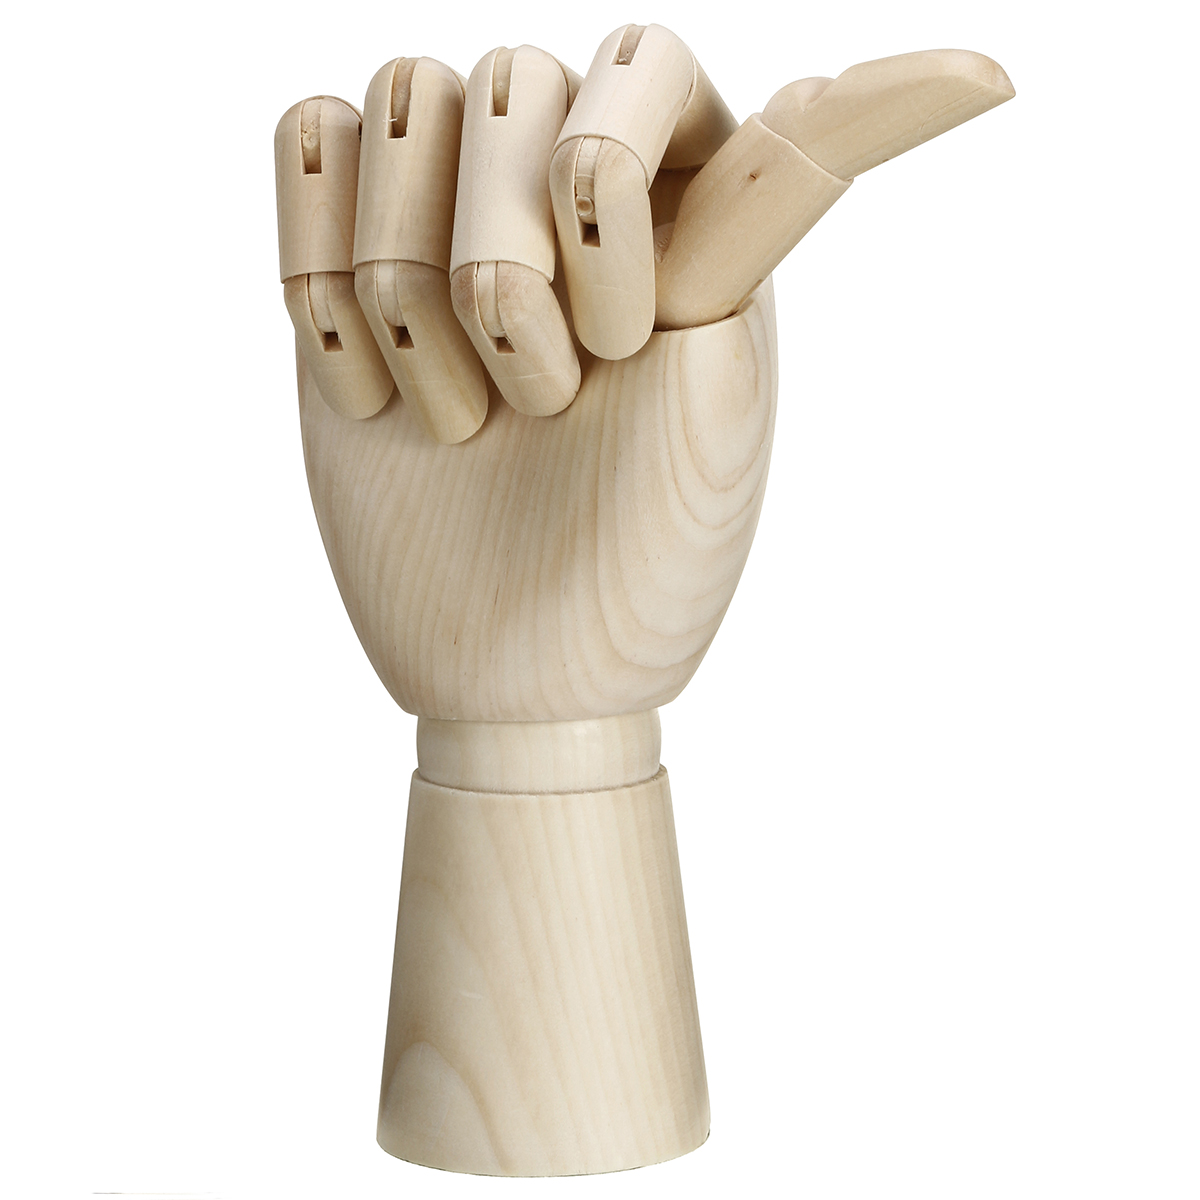 781012-Inch-Wooden-Hand-Body-Artist-Medical-Model-Flexible-Jointed-Wood-Sculpture-DIY-Education-1322443-8